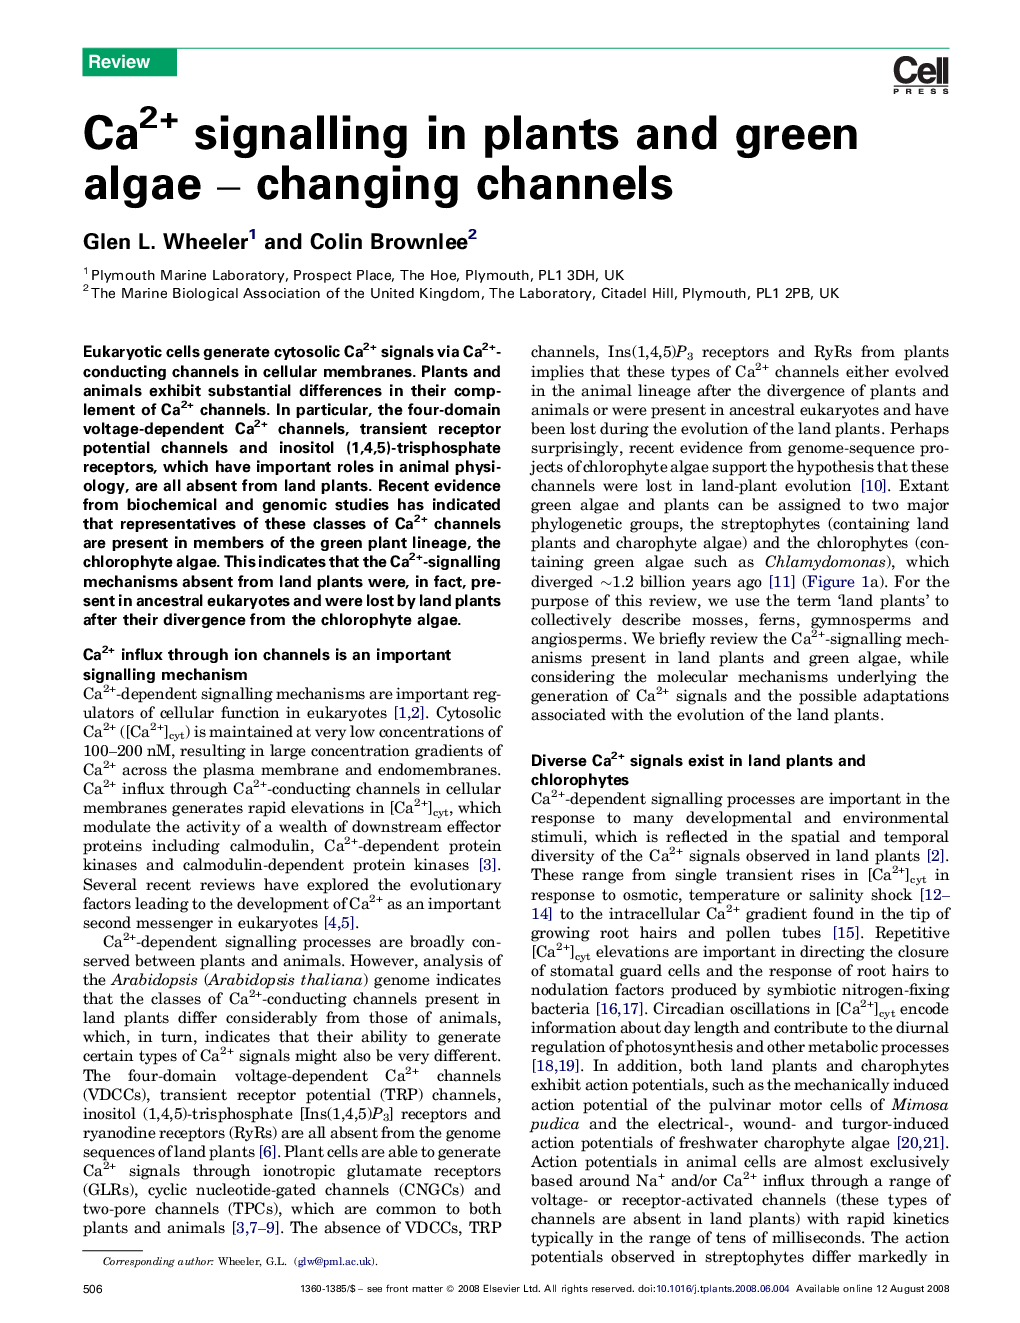 Ca2+ signalling in plants and green algae – changing channels